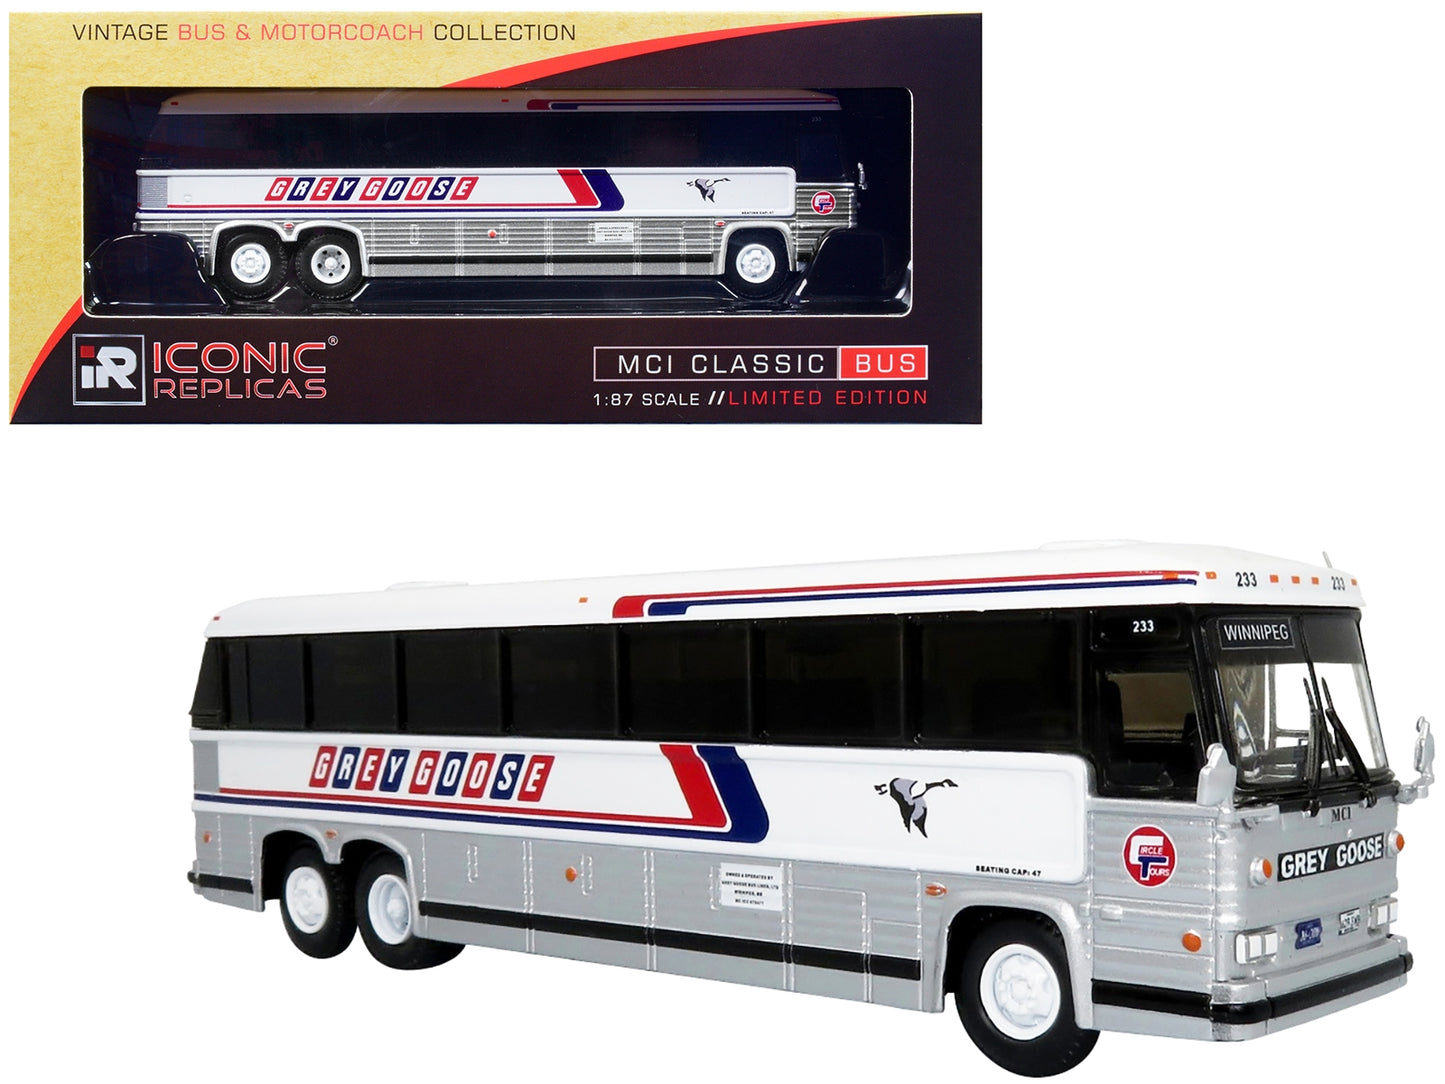 MCI MC-12 Coach Classic Bus "Grey Goose Lines" Destination: Winnipeg (Manitoba Canada) "Vintage Bus & Motorcoach Collection" 1/87 Diecast Model by Iconic Replicas